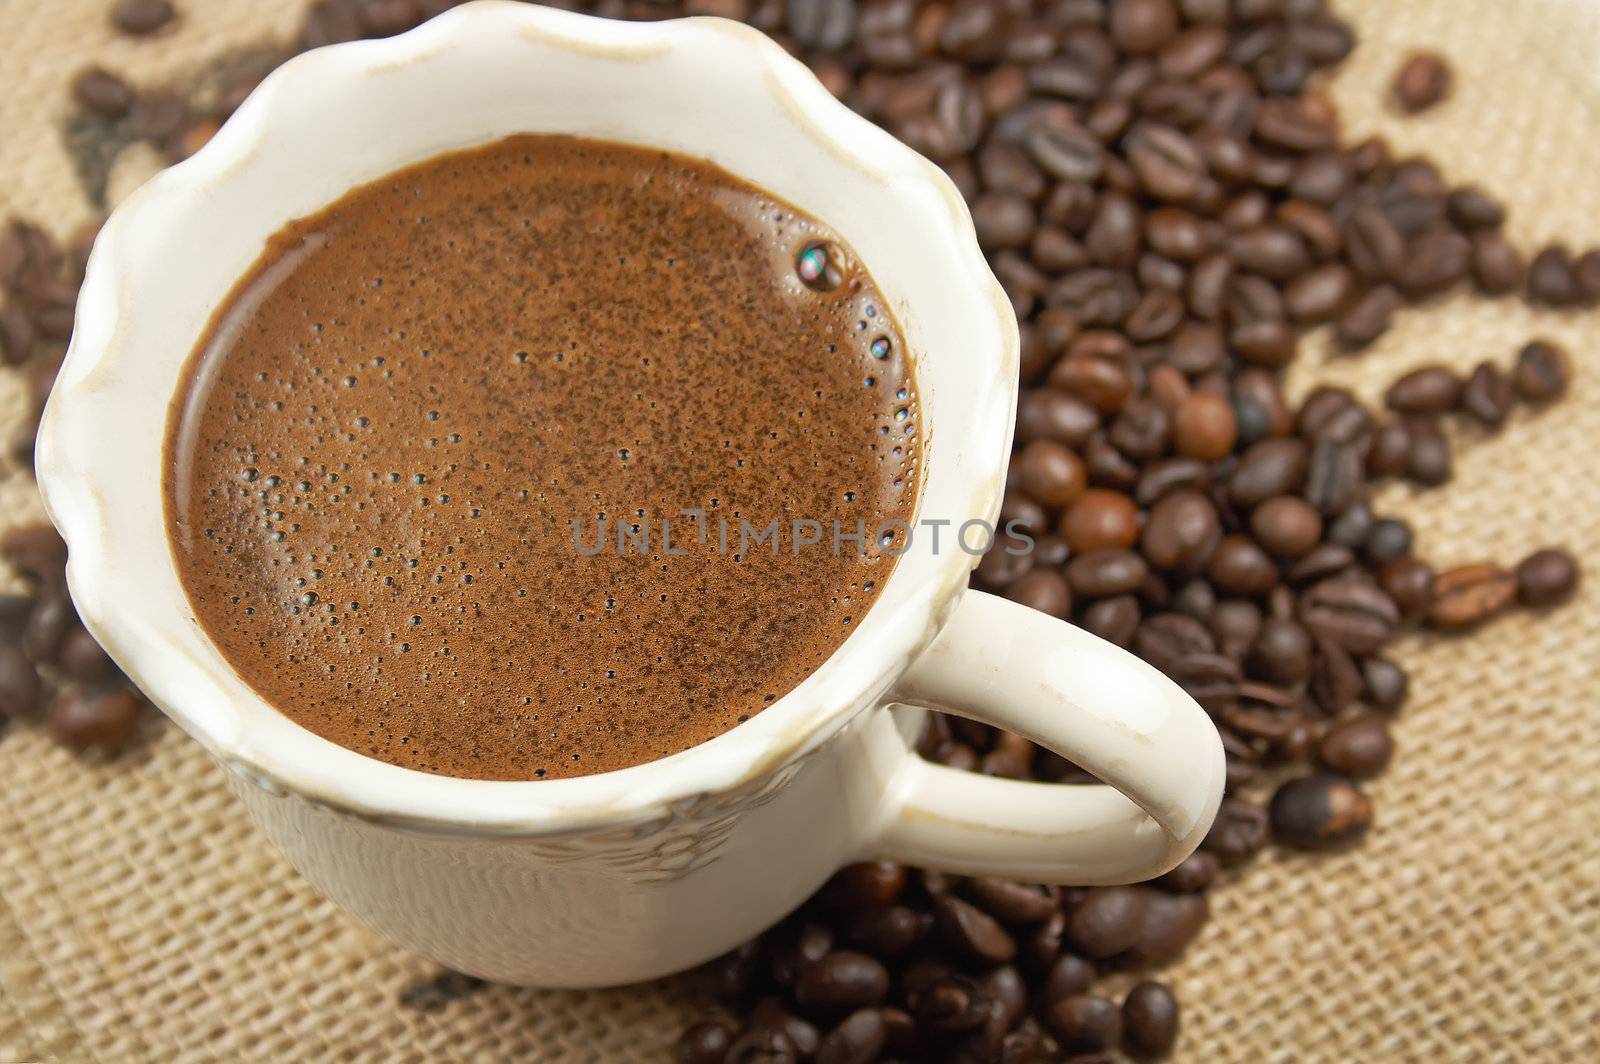 Cup of aromatic coffee and coffee beans on webbing material